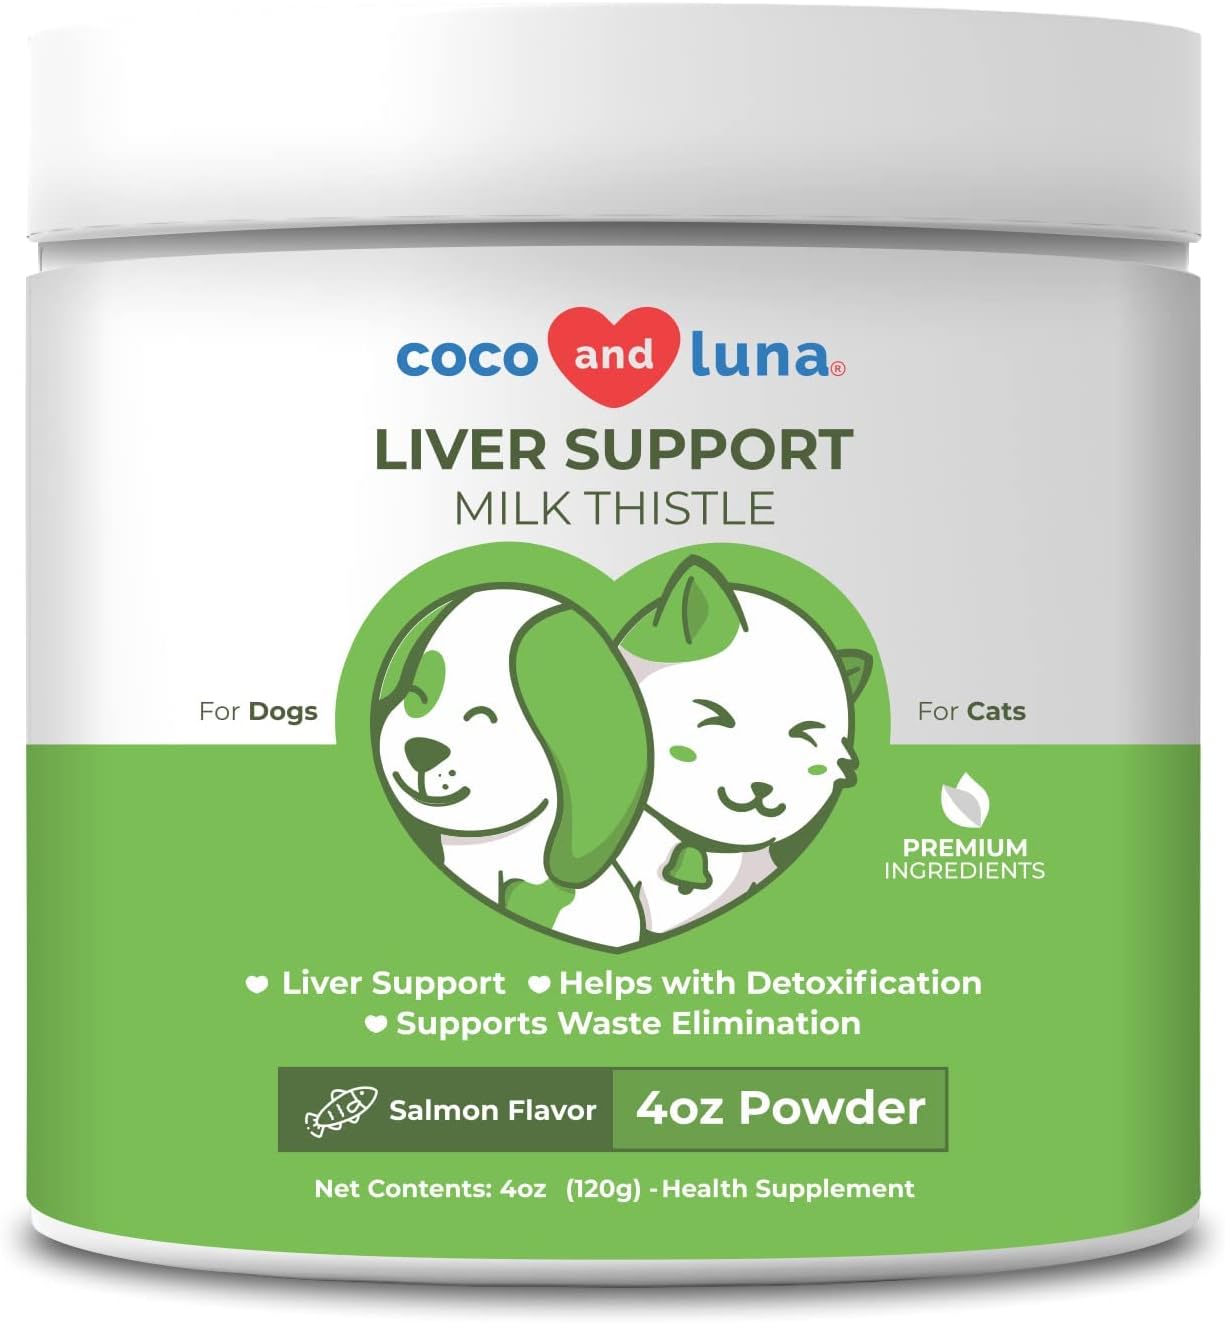 Milk Thistle for Cats - 4oz Powder - Natural Liver Support for Cats - with Same and L-Arginine - Detox, Hepatic Support, Promotes Liver Healthy Function for Cats, Kidney Support (for Cats and Dogs)